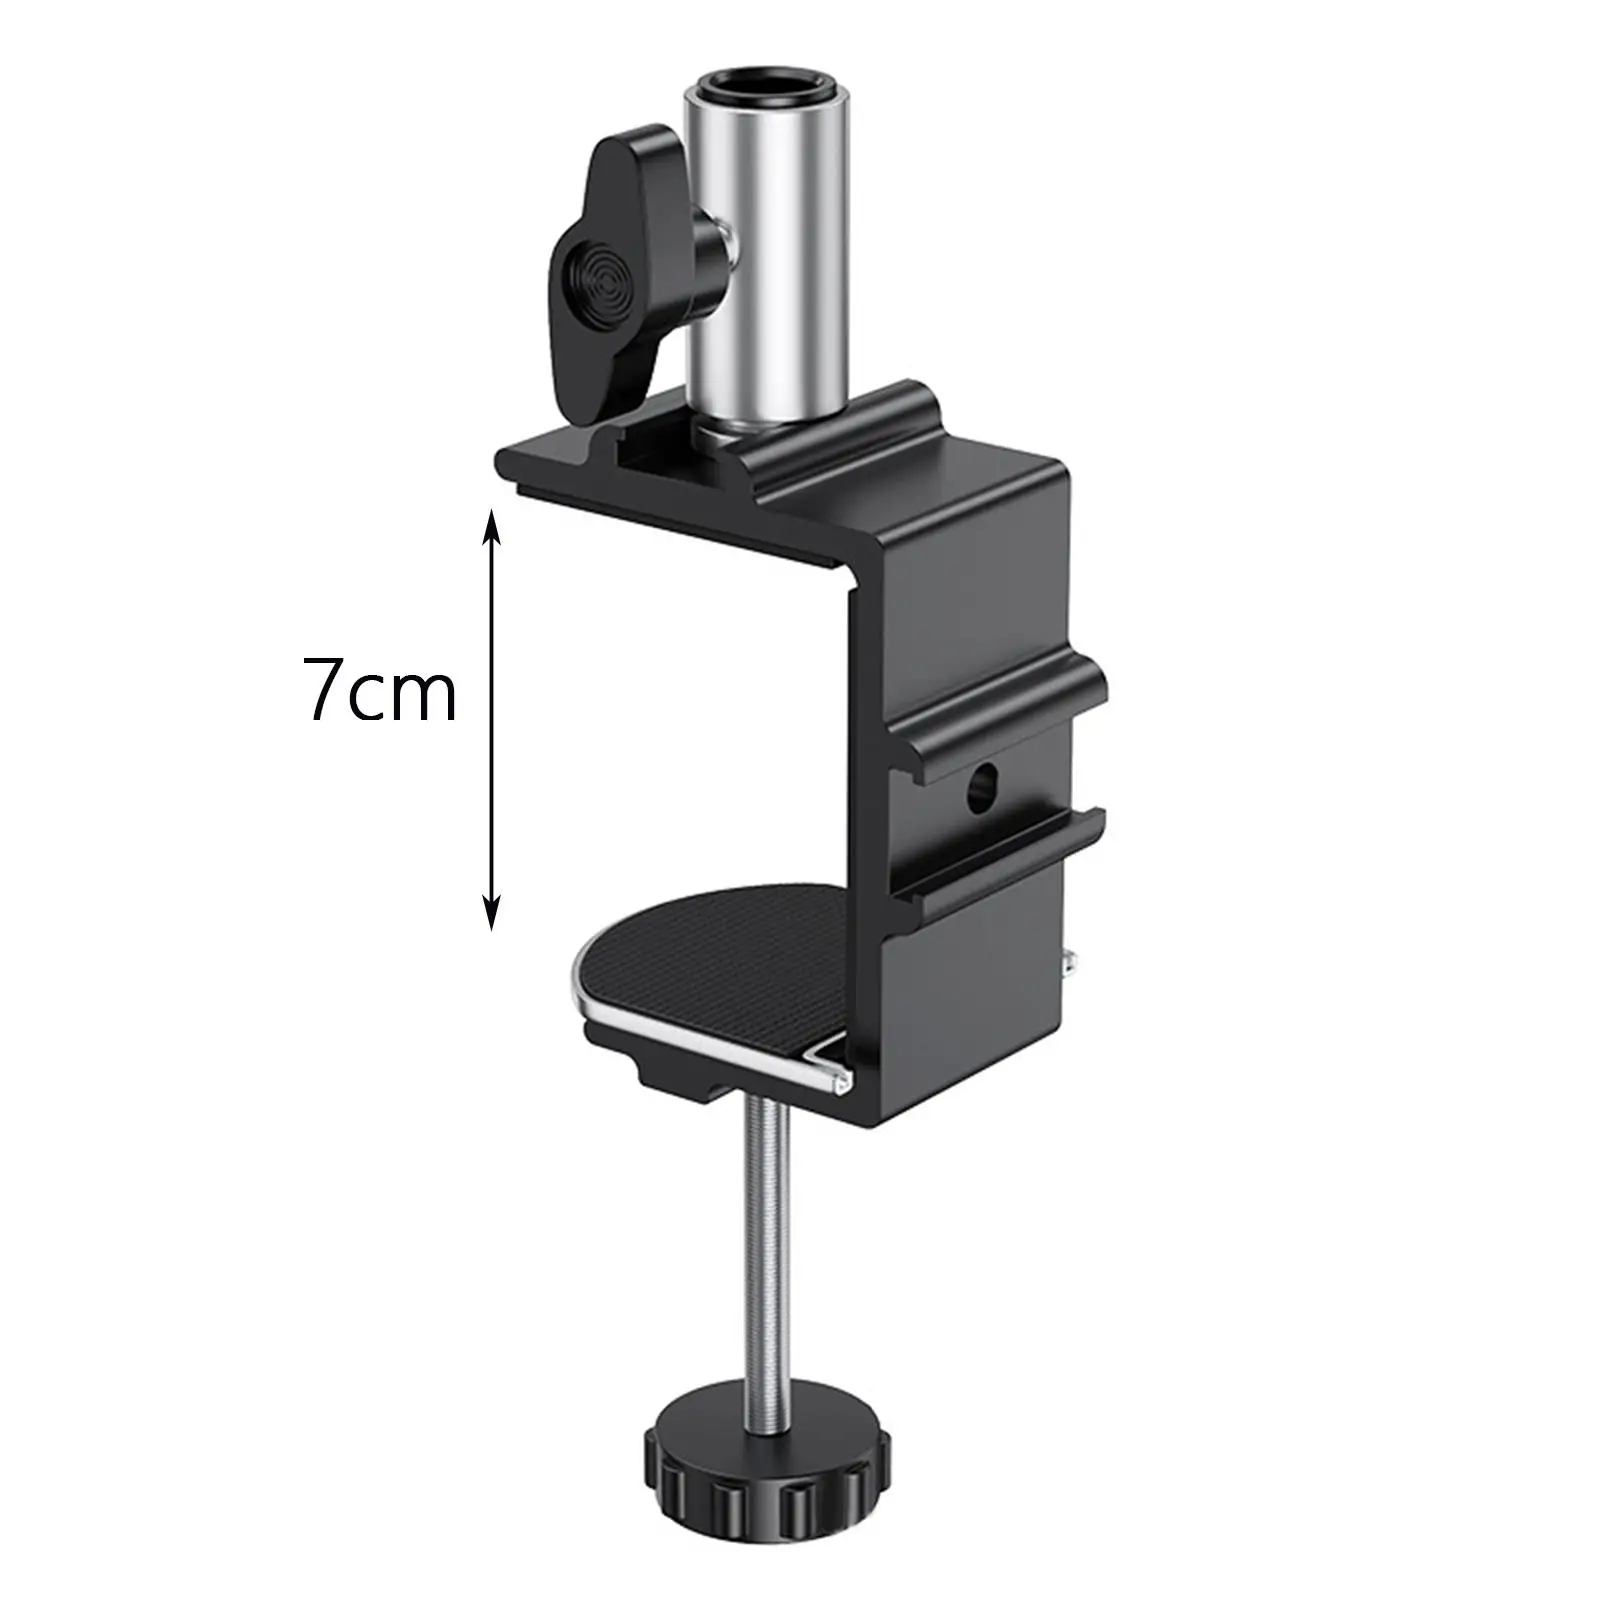 Desktop Mount Clamp Heavy Duty Detachable Easy to Clip Metal Holder for Stand-Working Speeches Reading Recording Presentation